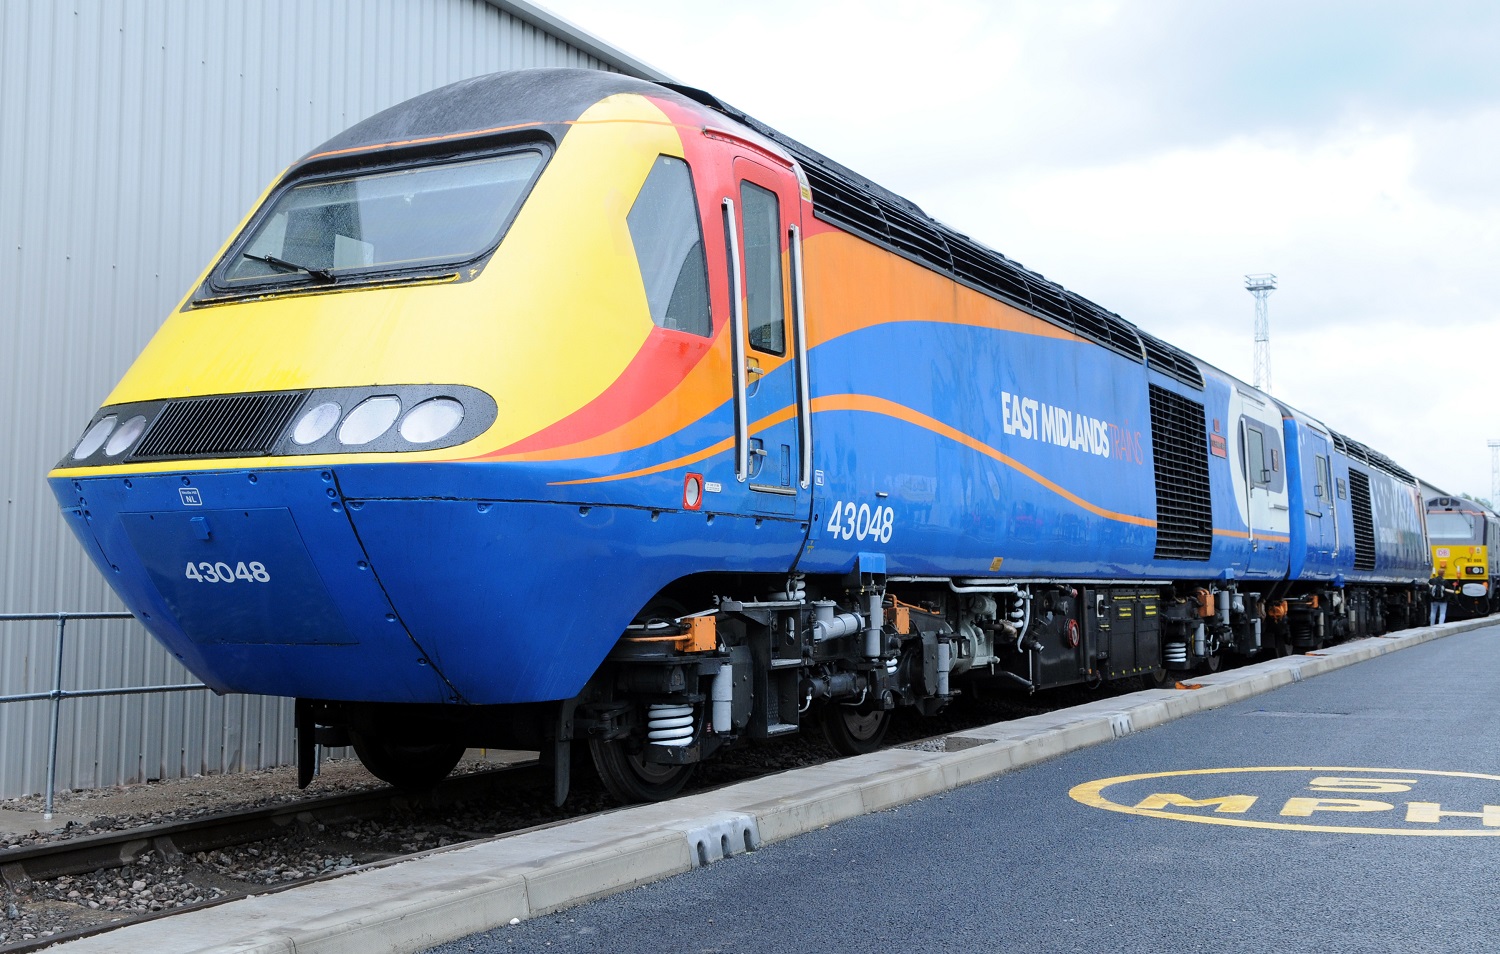 East Midlands Trains Class 43 power car 43048 TCB Miller MBE